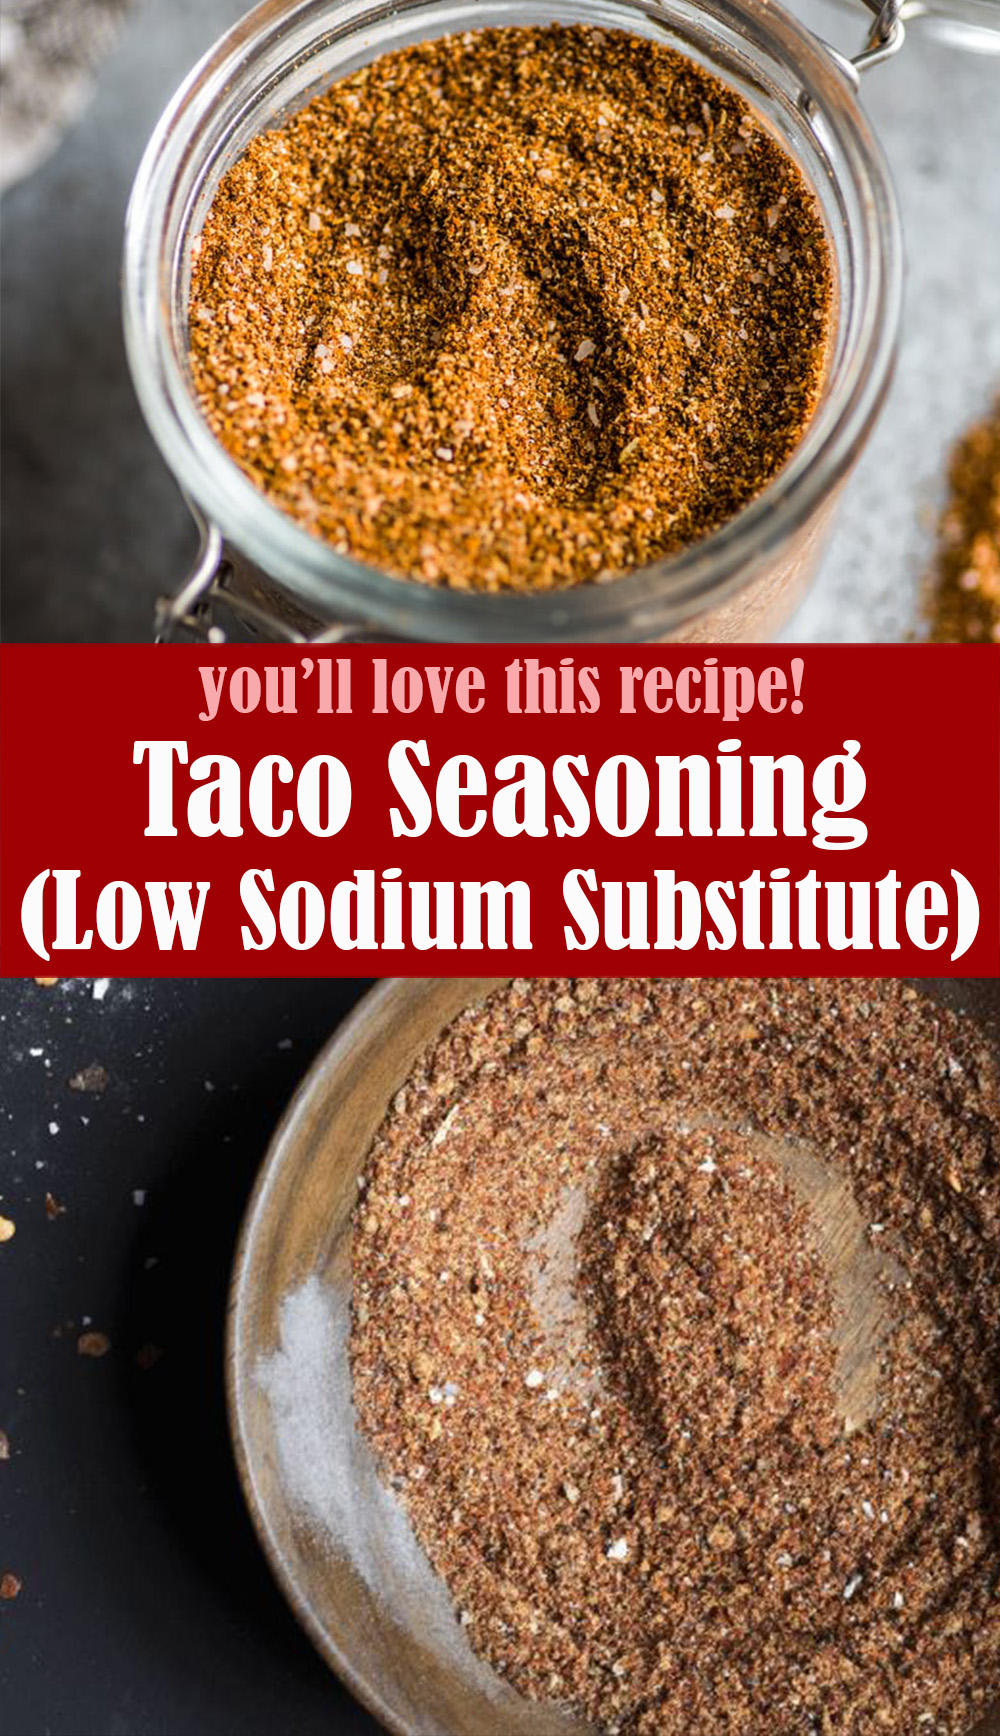 Ingredients 1 tablespoon Chili Powder 2 teaspoons Onion Powder 1 teaspoon Ground Cumin 1 teaspoon Garlic Powder 1 teaspoon Paprika 1 teaspoon Ground Oregano Directions Mix all ingredients together.